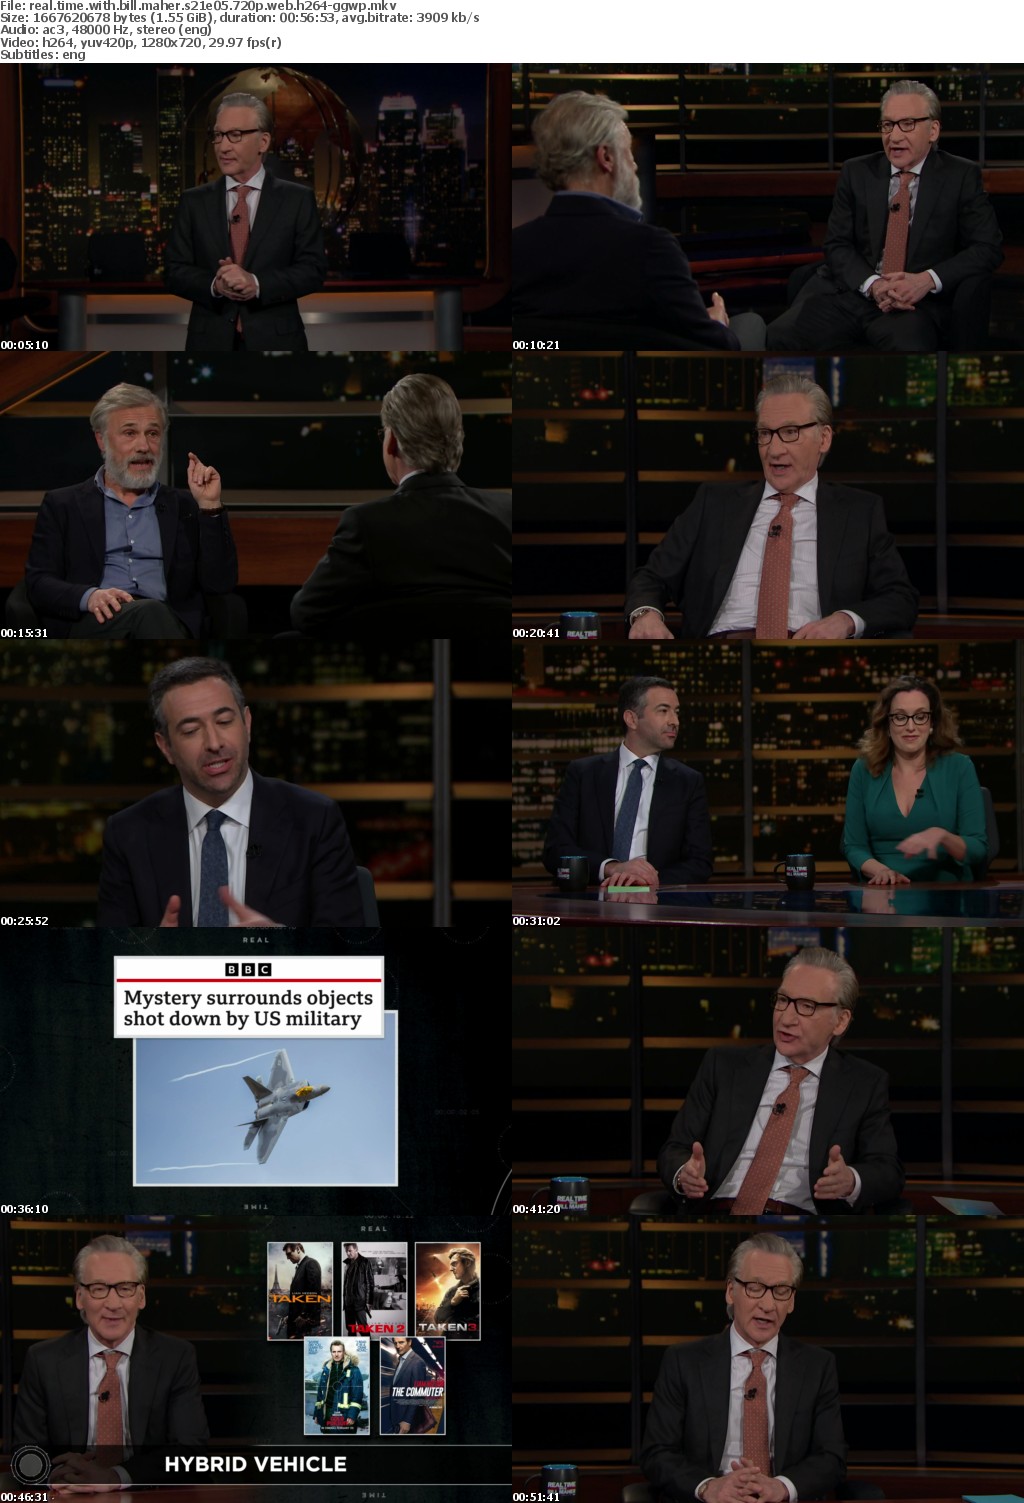 Real Time with Bill Maher S21E05 720p WEB H264-GGWP